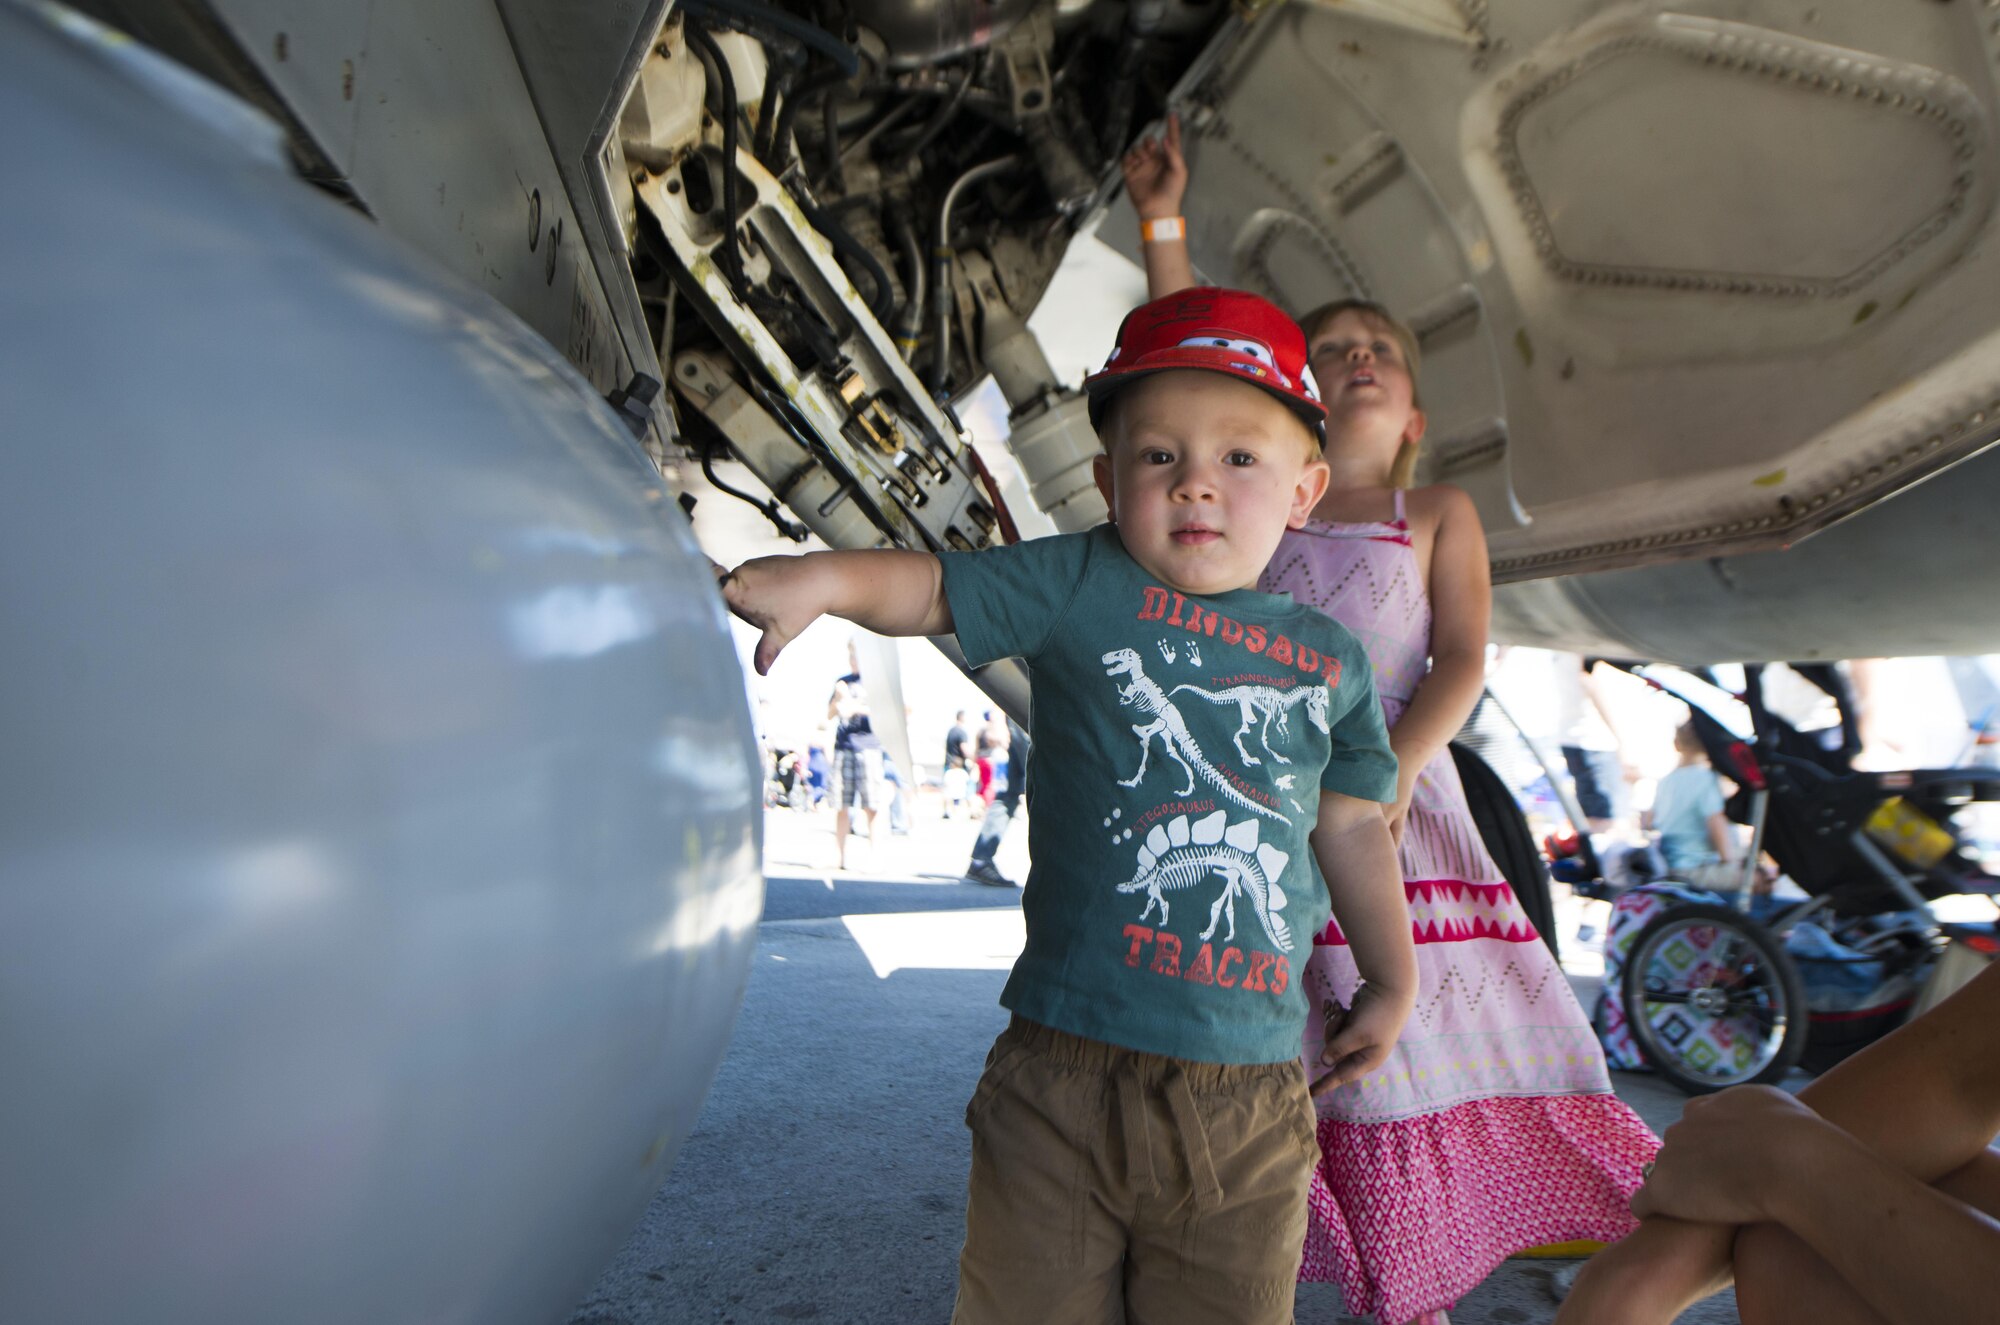 A child touches an aircraft during SkyFest 2017 Air Show and Open House at Fairchild Air Force Base, Washington, July 30, 2017. SkyFest was hosted to thank the local and regional community for their support and give them the opportunity to meet Airmen and learn about the Air Force mission. (U.S. Air Force photo/Senior Airman Janelle Patiño)